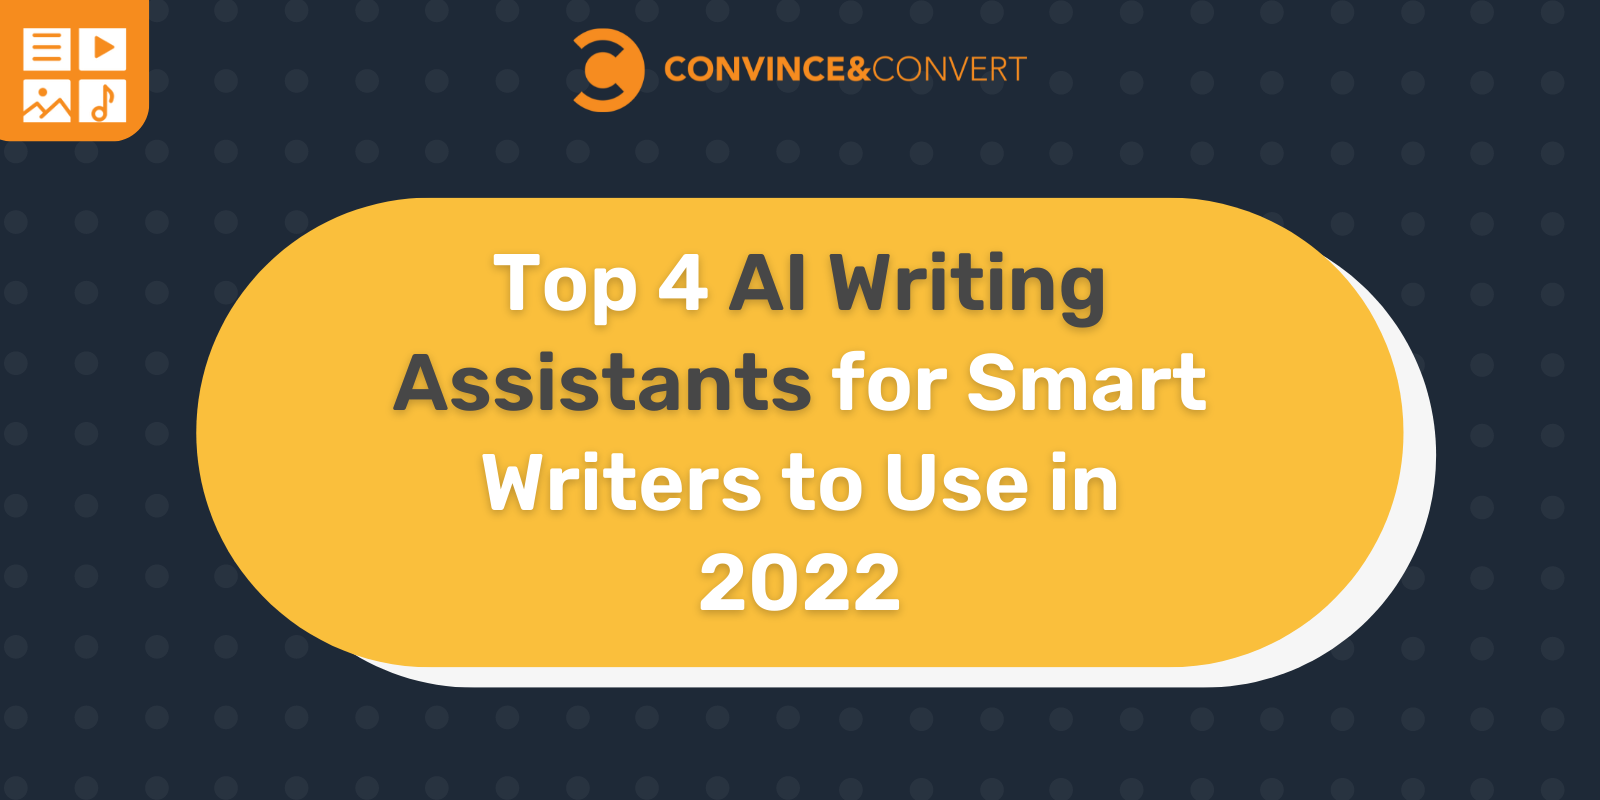 You are currently viewing Top 4 AI Writing Assistants for Smart Writers to Use in 2022